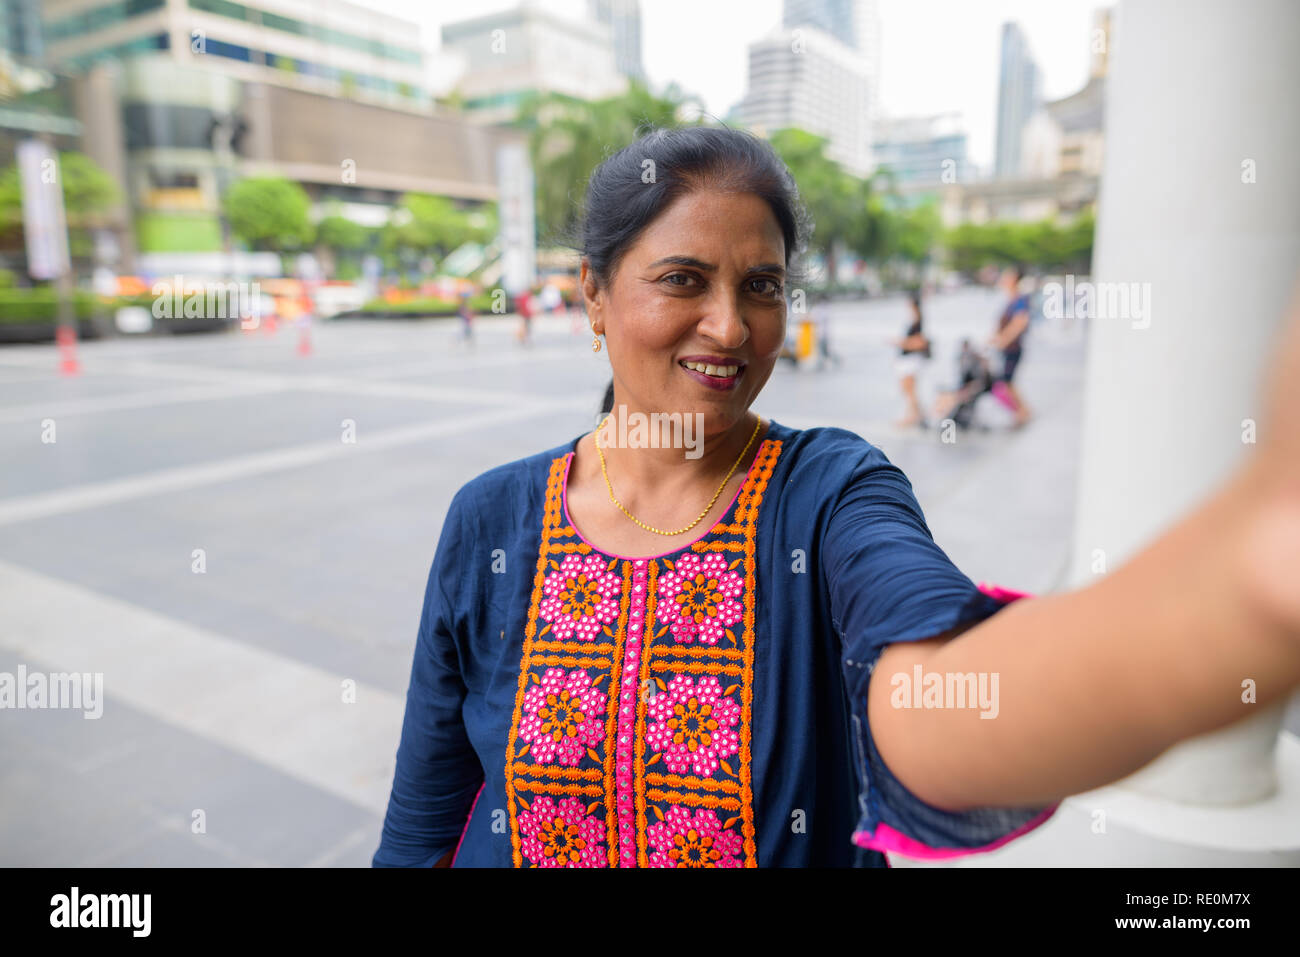 Personal point view of mature Indian woman taking selfie Stock Photo